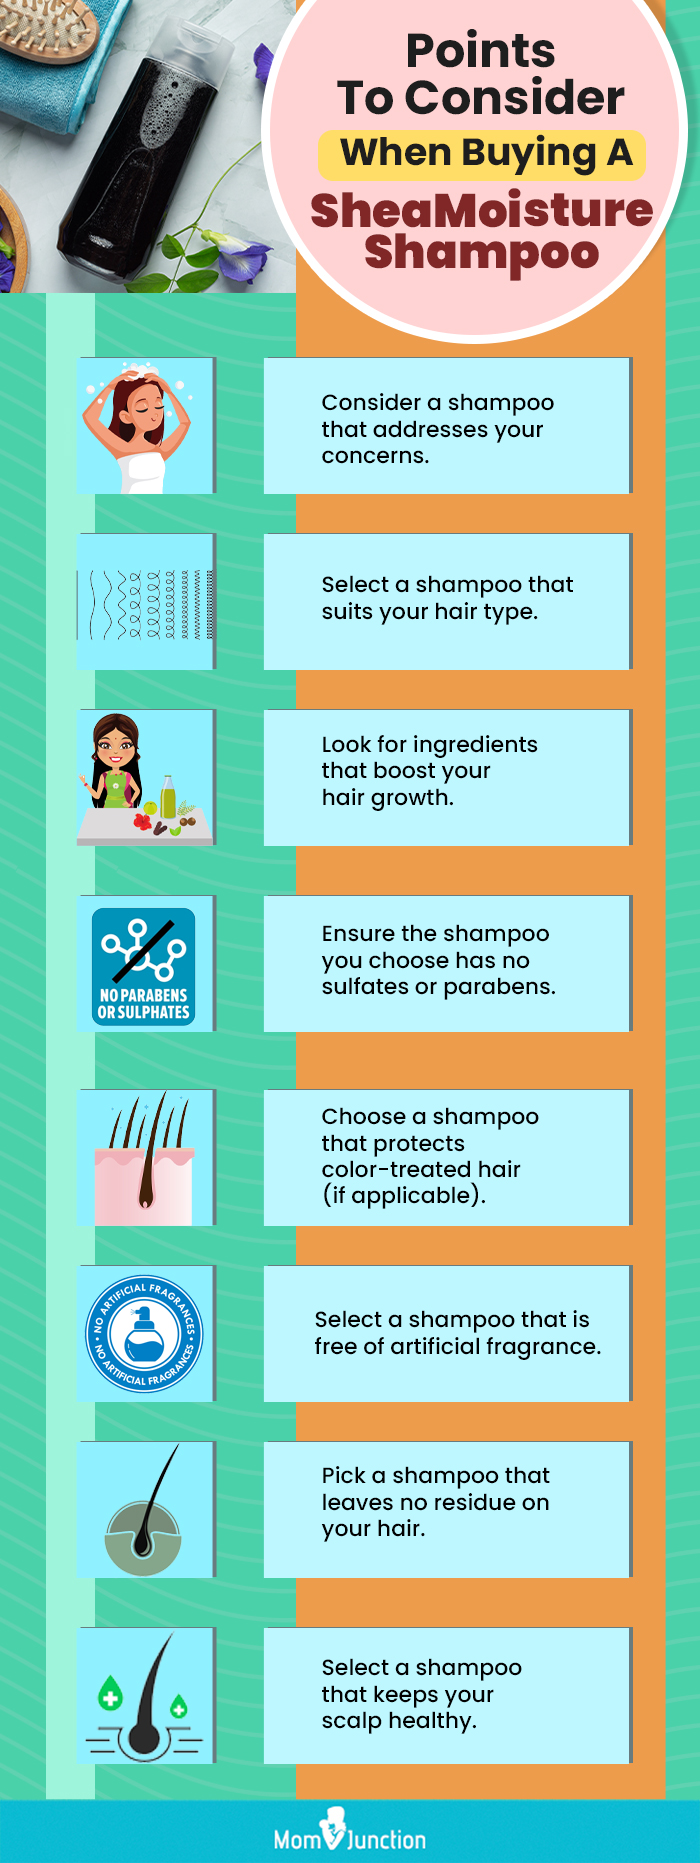 Points To Consider When Buying A SheaMoisture Shampoo (infographic)